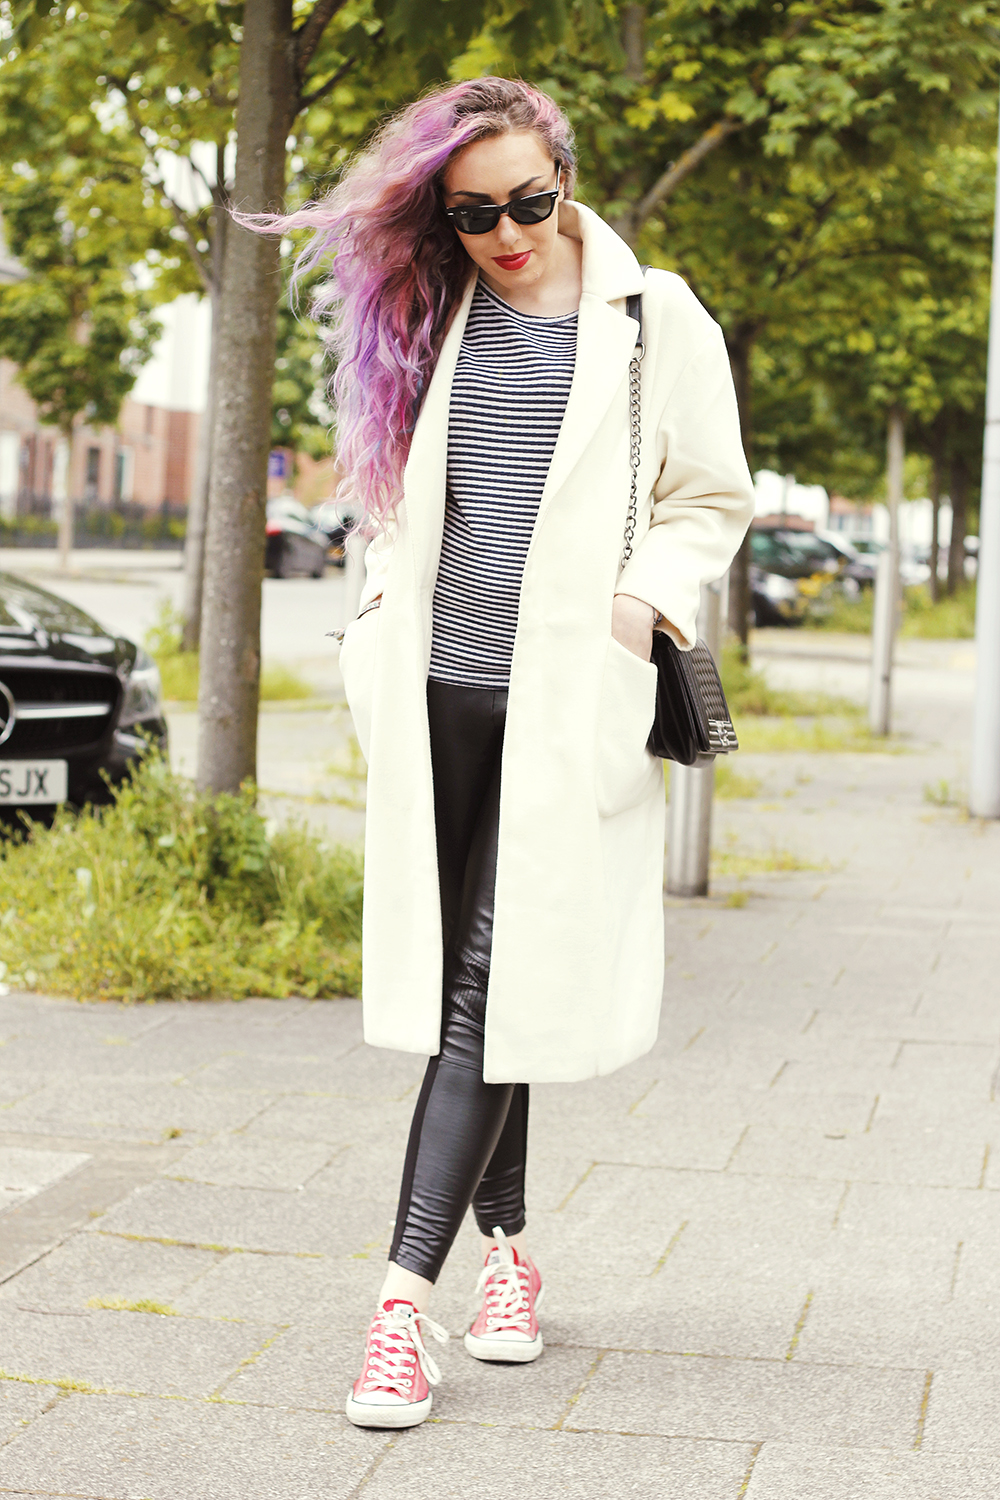 Street Style: Long White Coat, Stripe Top, Red Converse, Quilted Bag, Ray Ban Sunglasses